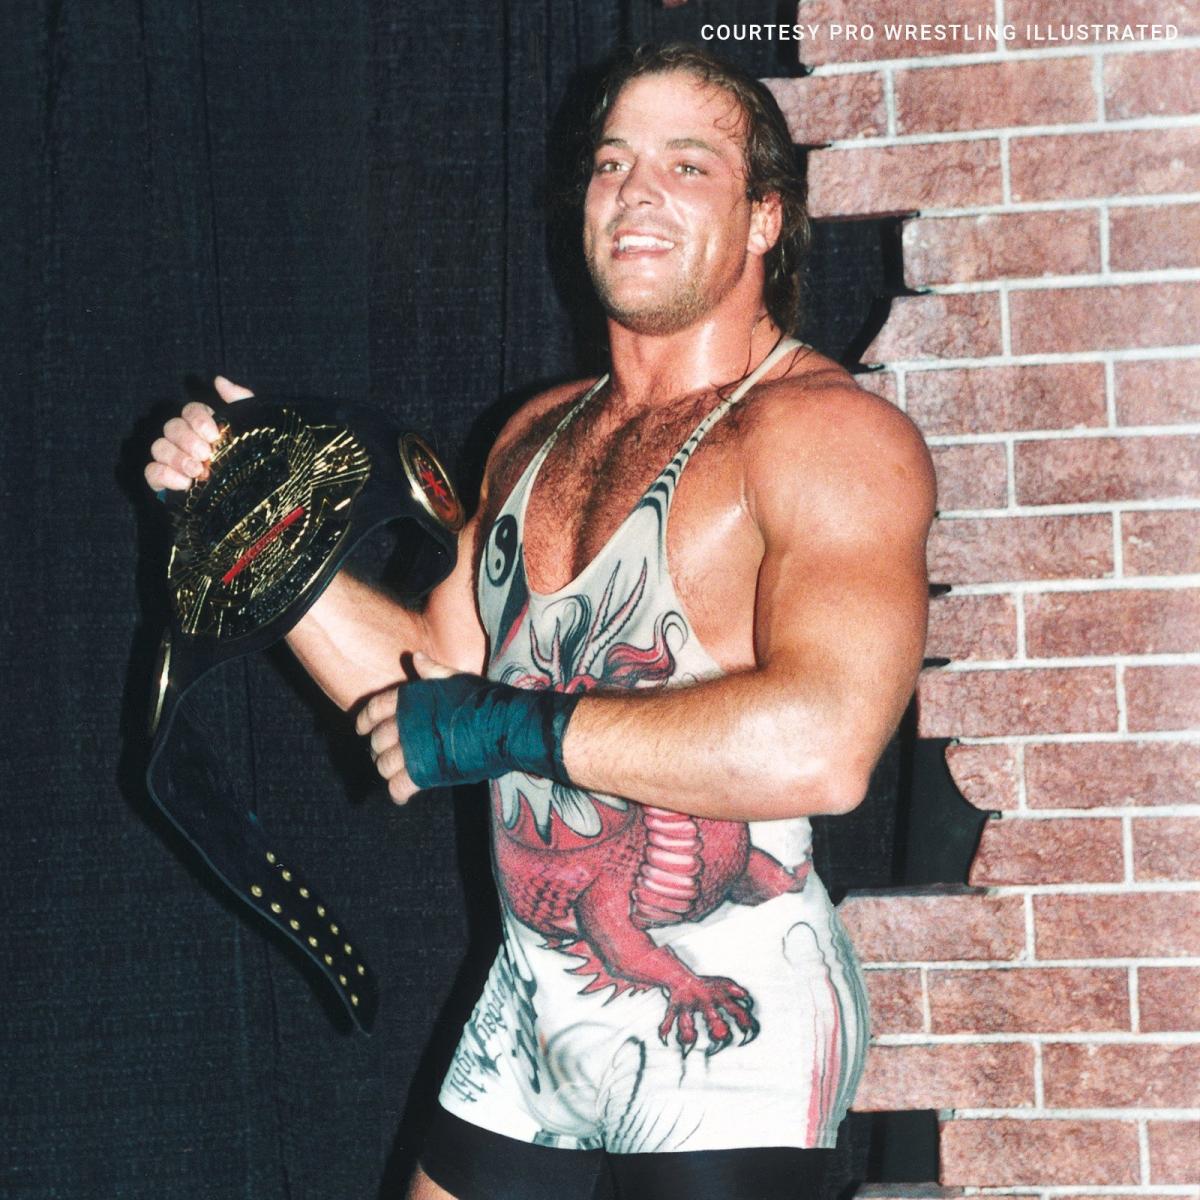 4/4/1998

Rob Van Dam defeated Bam Bam Bigelow to win the ECW Television Title on Hardcore TV from the Flickinger Center in Buffalo, New York.

#ECW #ECFNW #ExtremeChampionshipWrestling #RobVanDam #RVD #TheWholeFuckingShow #OneOfAKind #WWE #WWELegend #WWELegends #WWEHistory